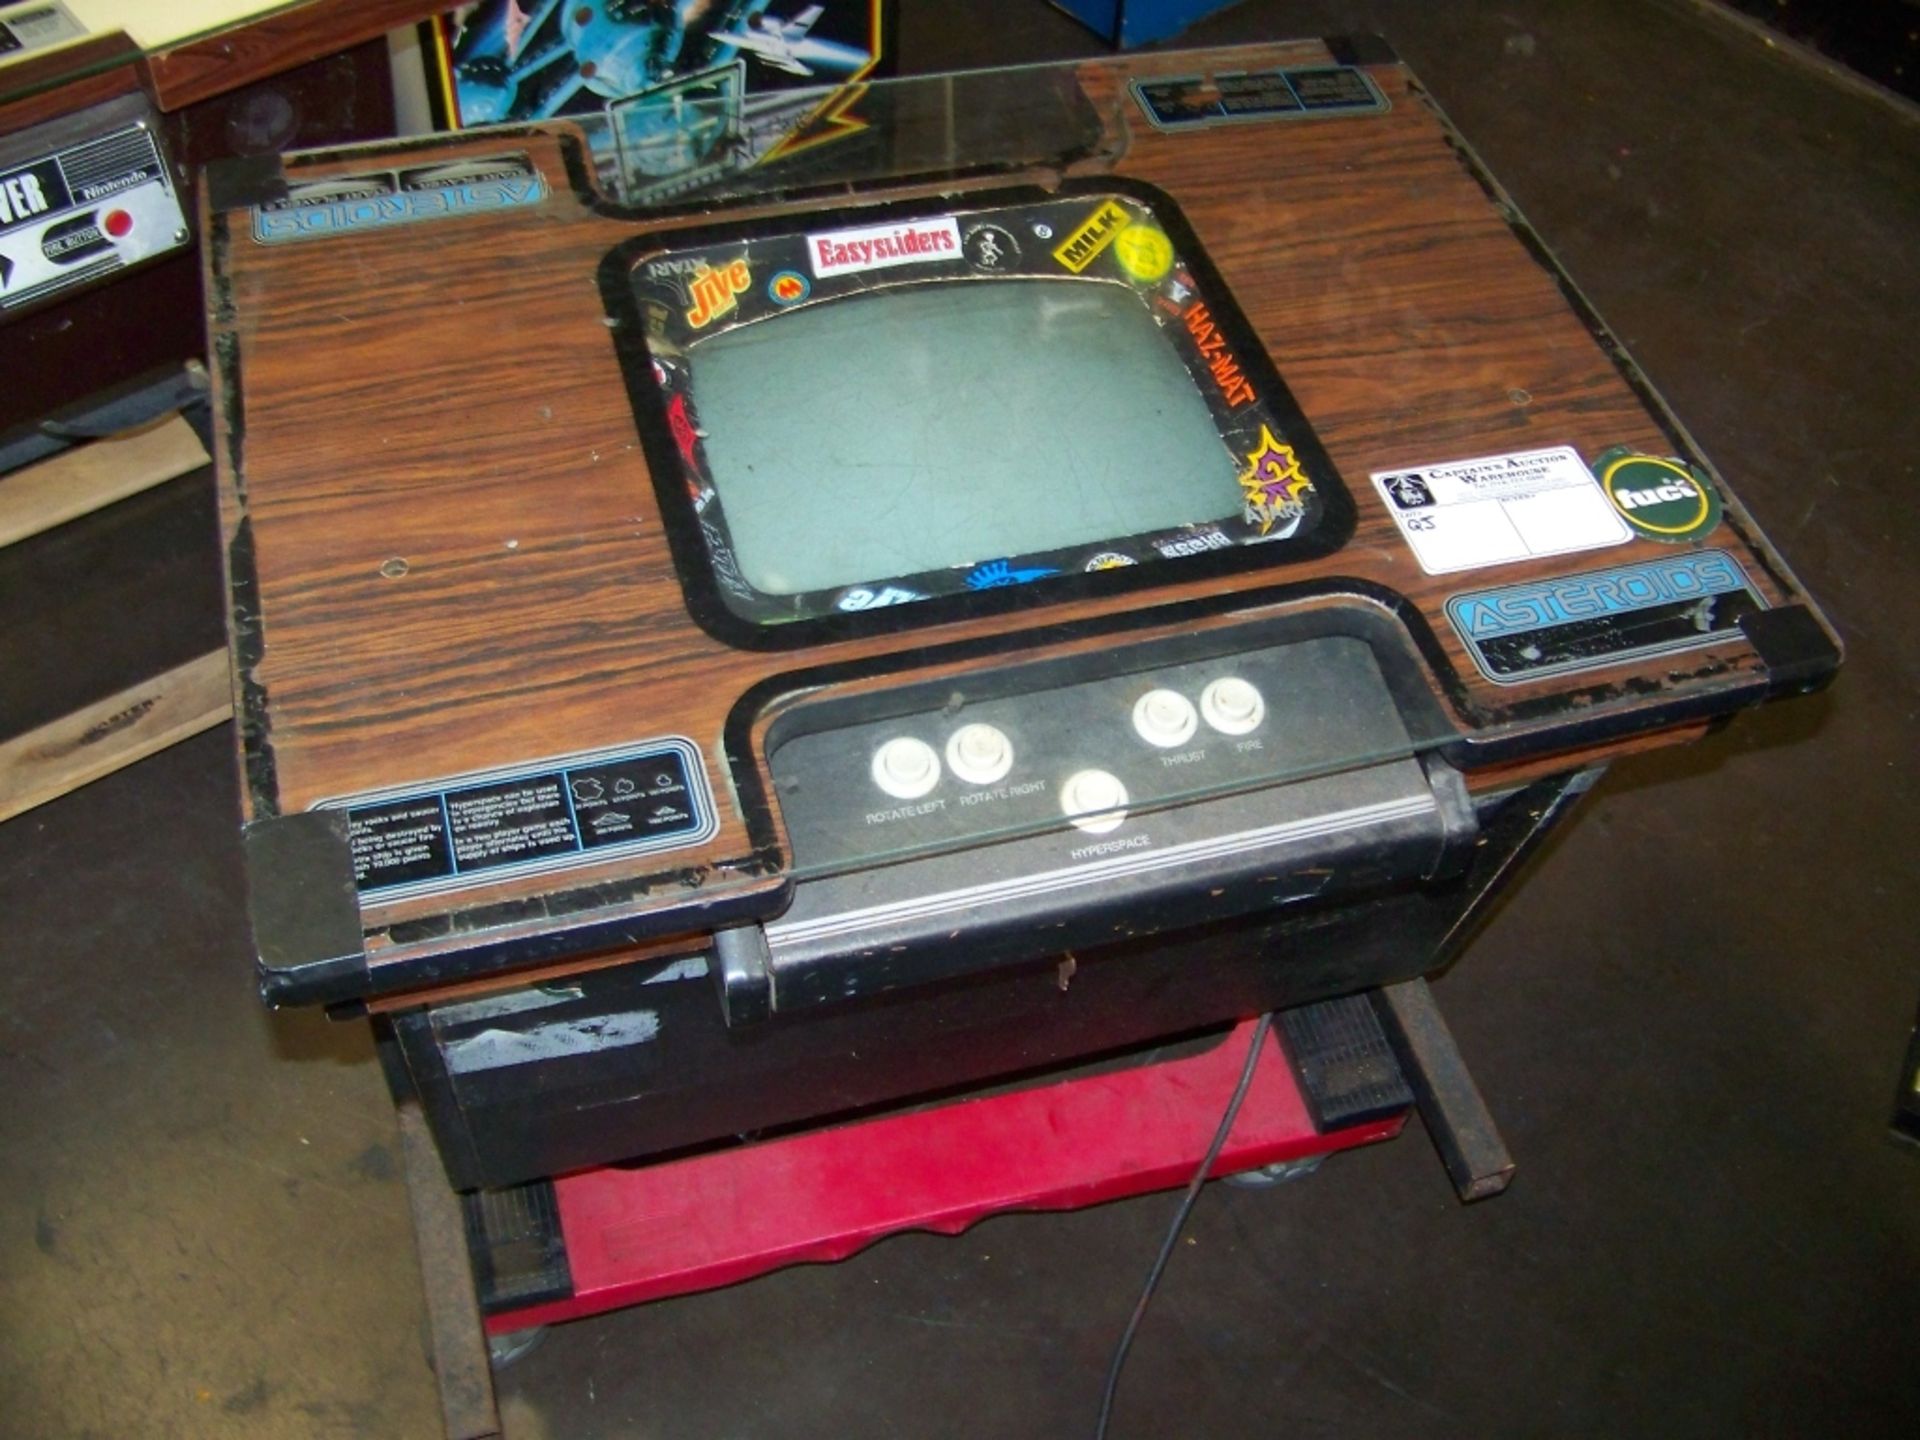 ASTEROIDS CLASSIC COCKTAIL TABLE ARCADE GAME Item is in used condition. Evidence of wear and - Image 2 of 2